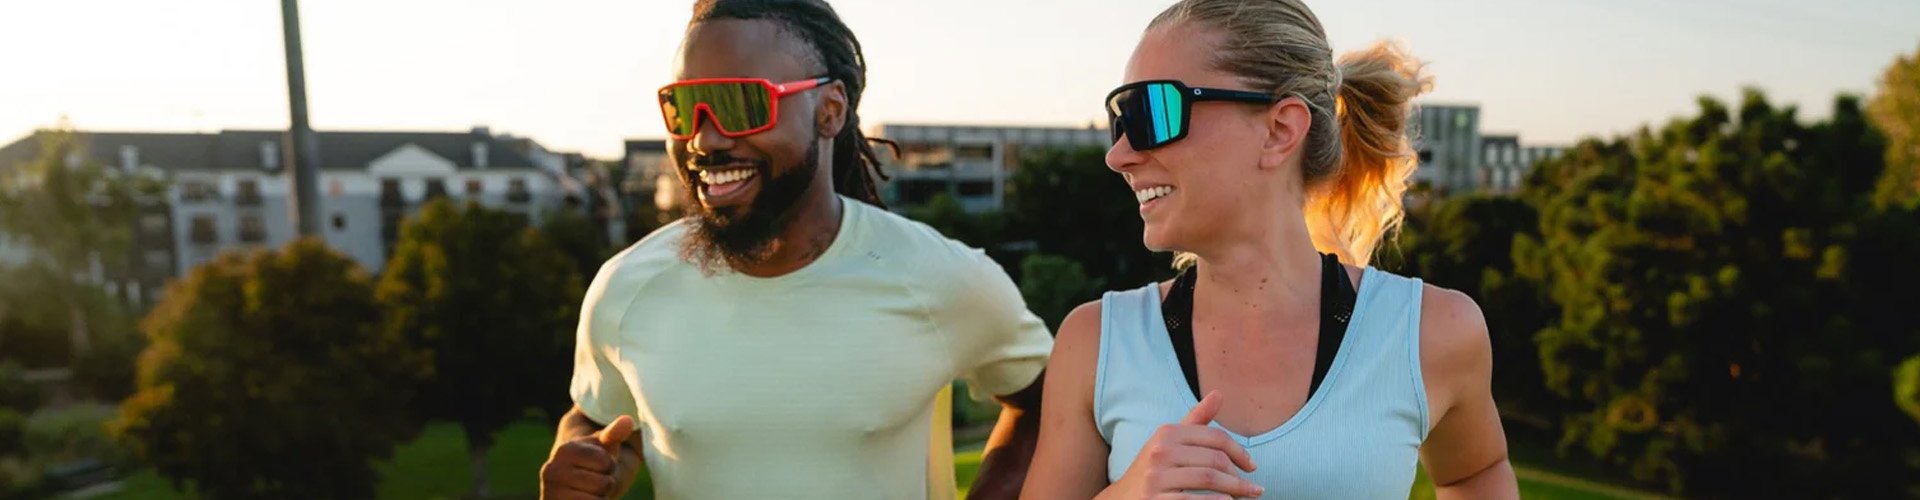 2 people running with Optic Nerve glasses on